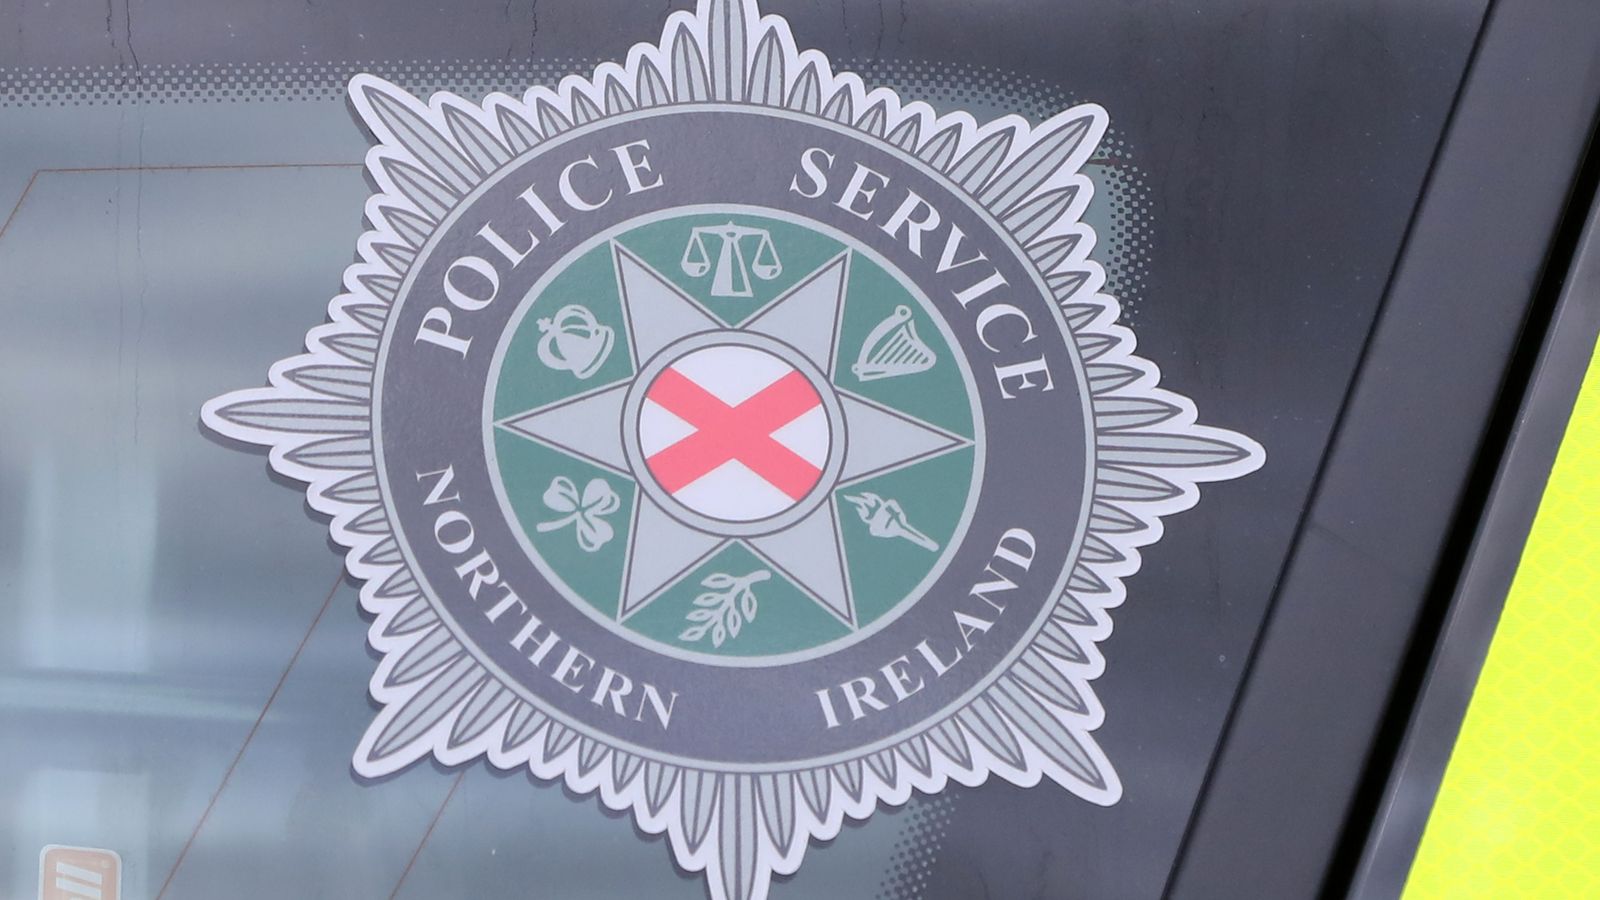 Dungannon: Man arrested on suspicion of murder after death of two-year-old girl